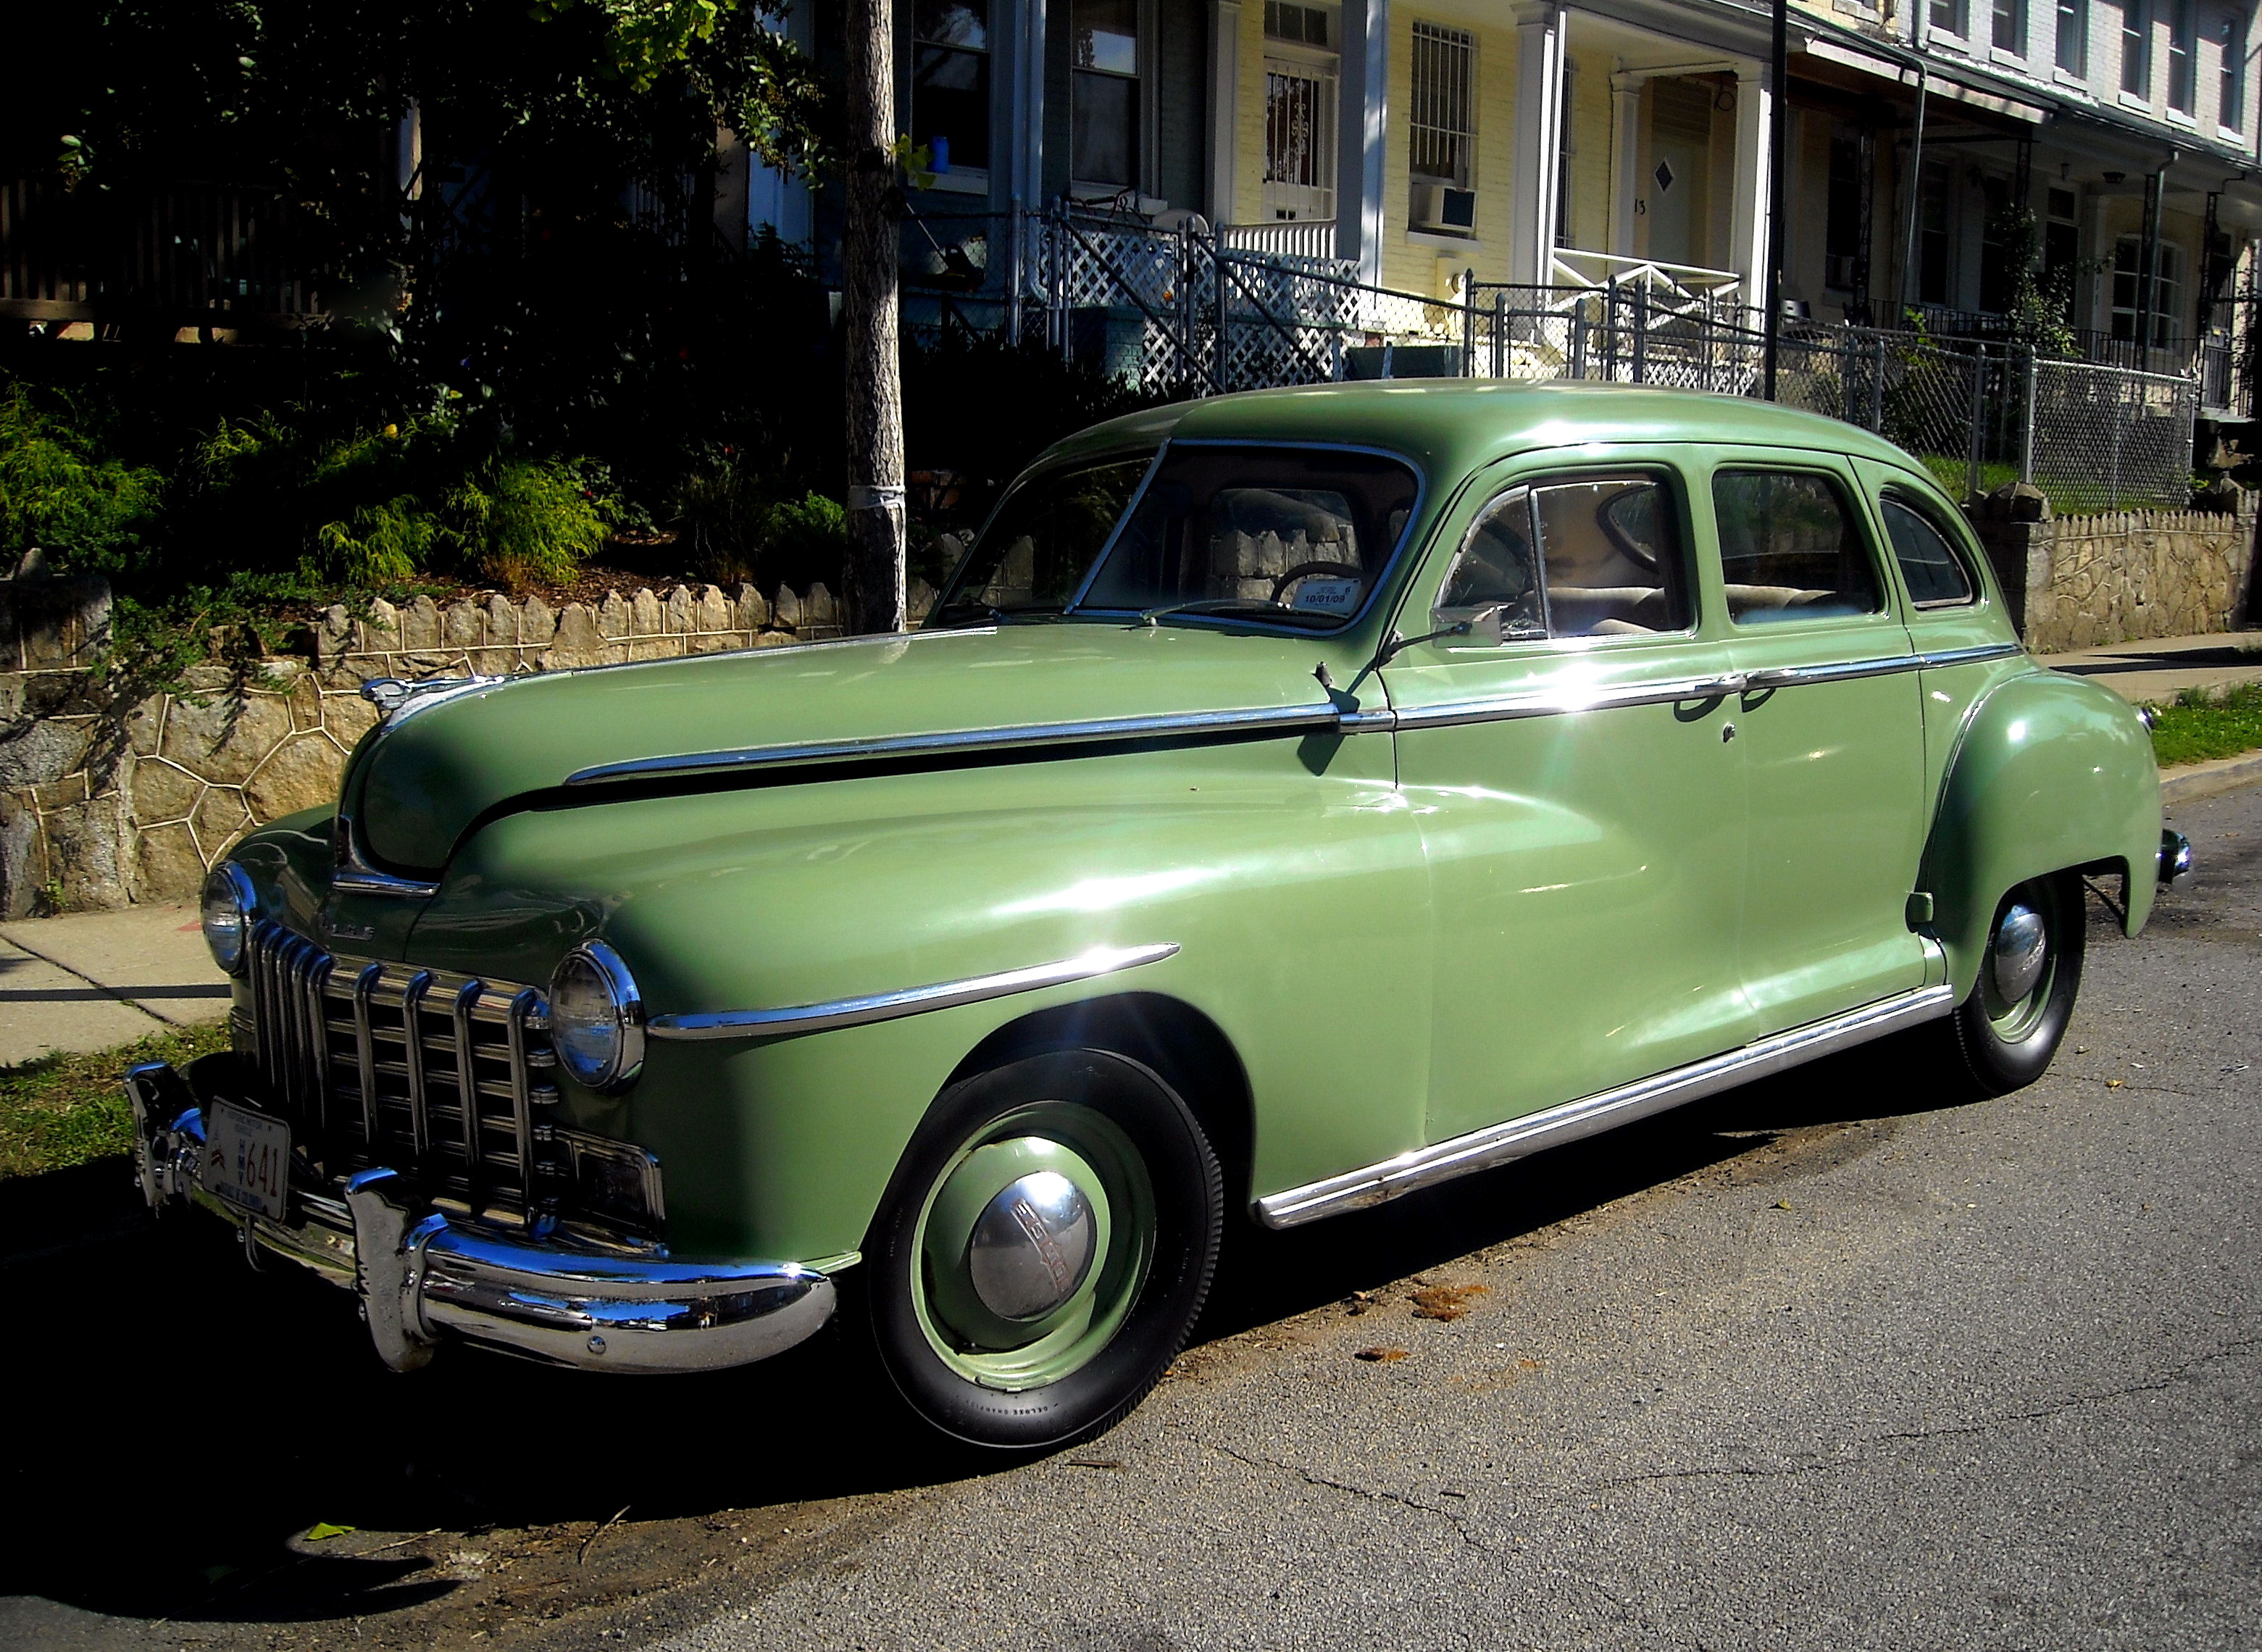 File:Vintage car on Capitol Hill.jpg - Wikimedia Commons